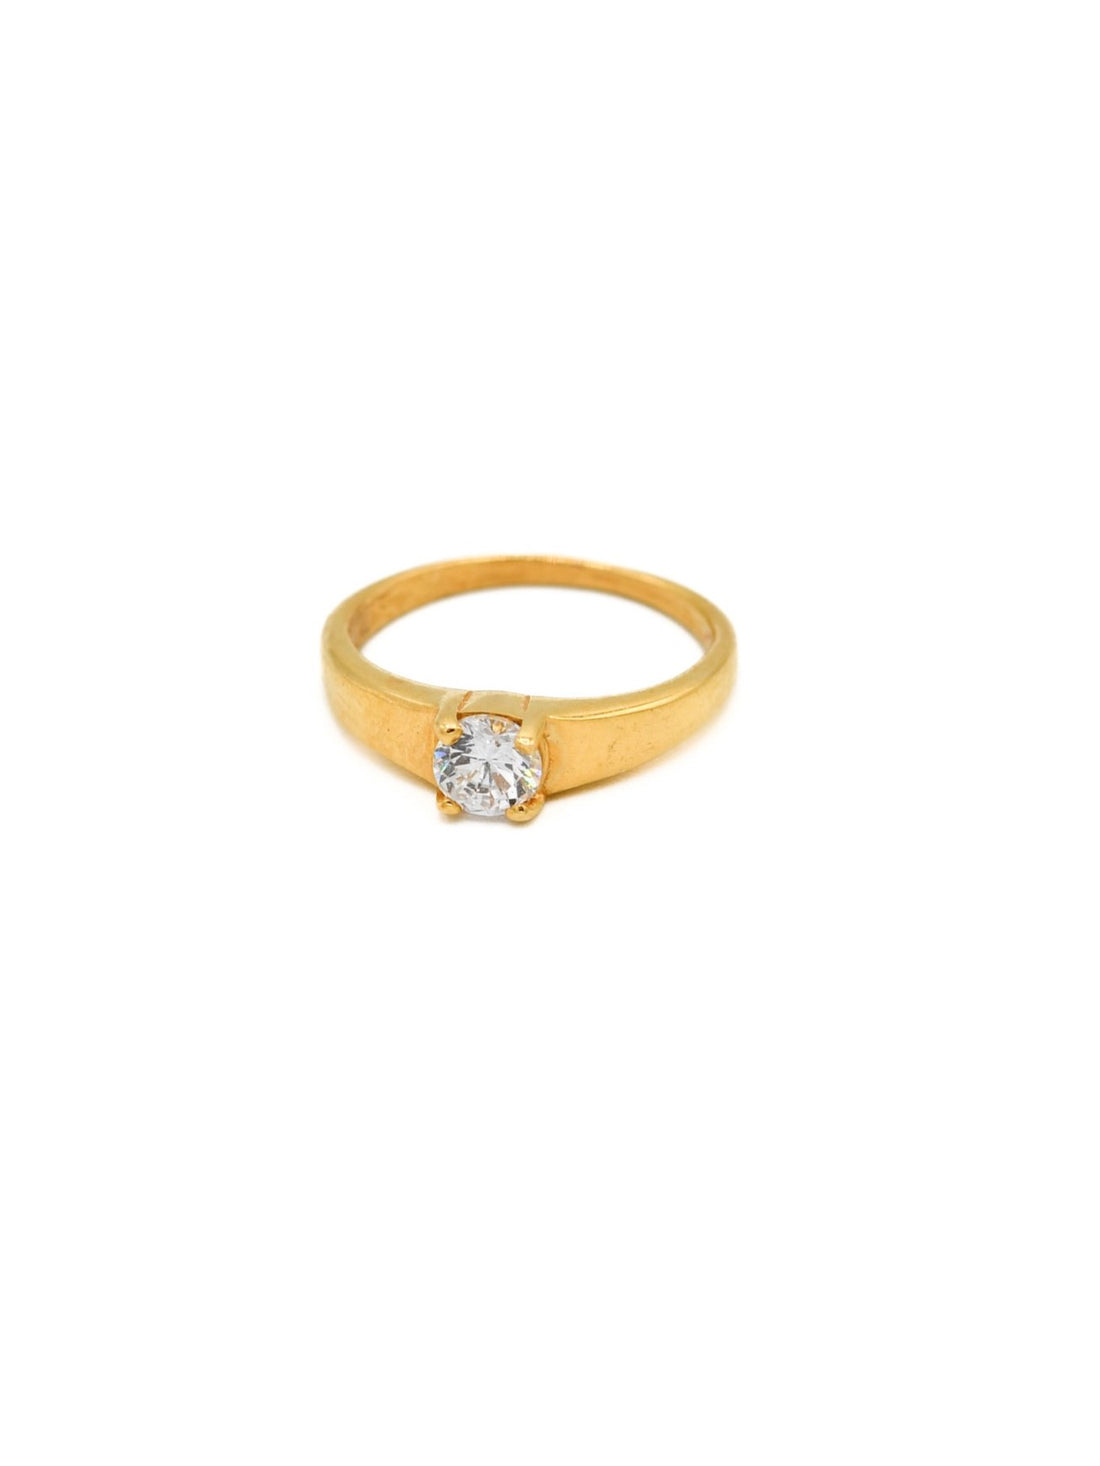 22ct Gold CZ Baby Ring - Roop Darshan